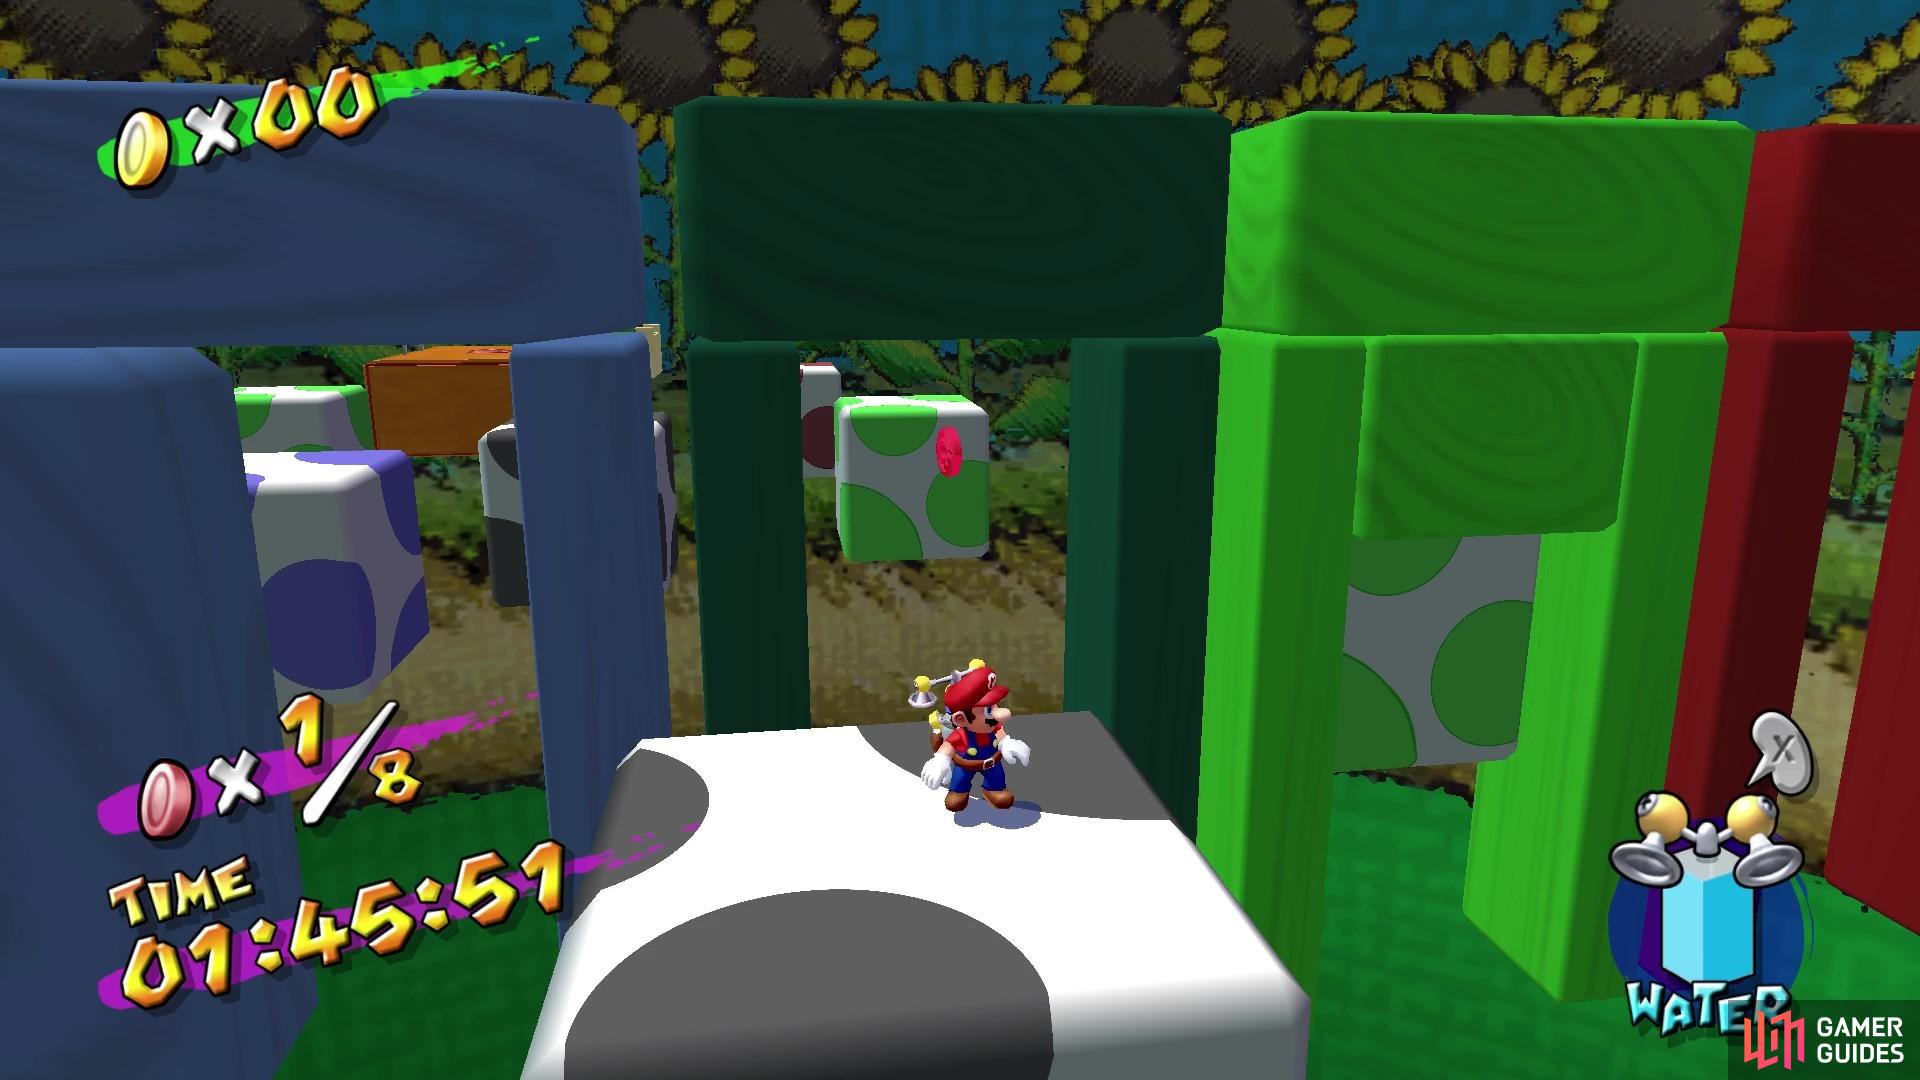 Use the different colored yoshi blocks to take you to the red coins.